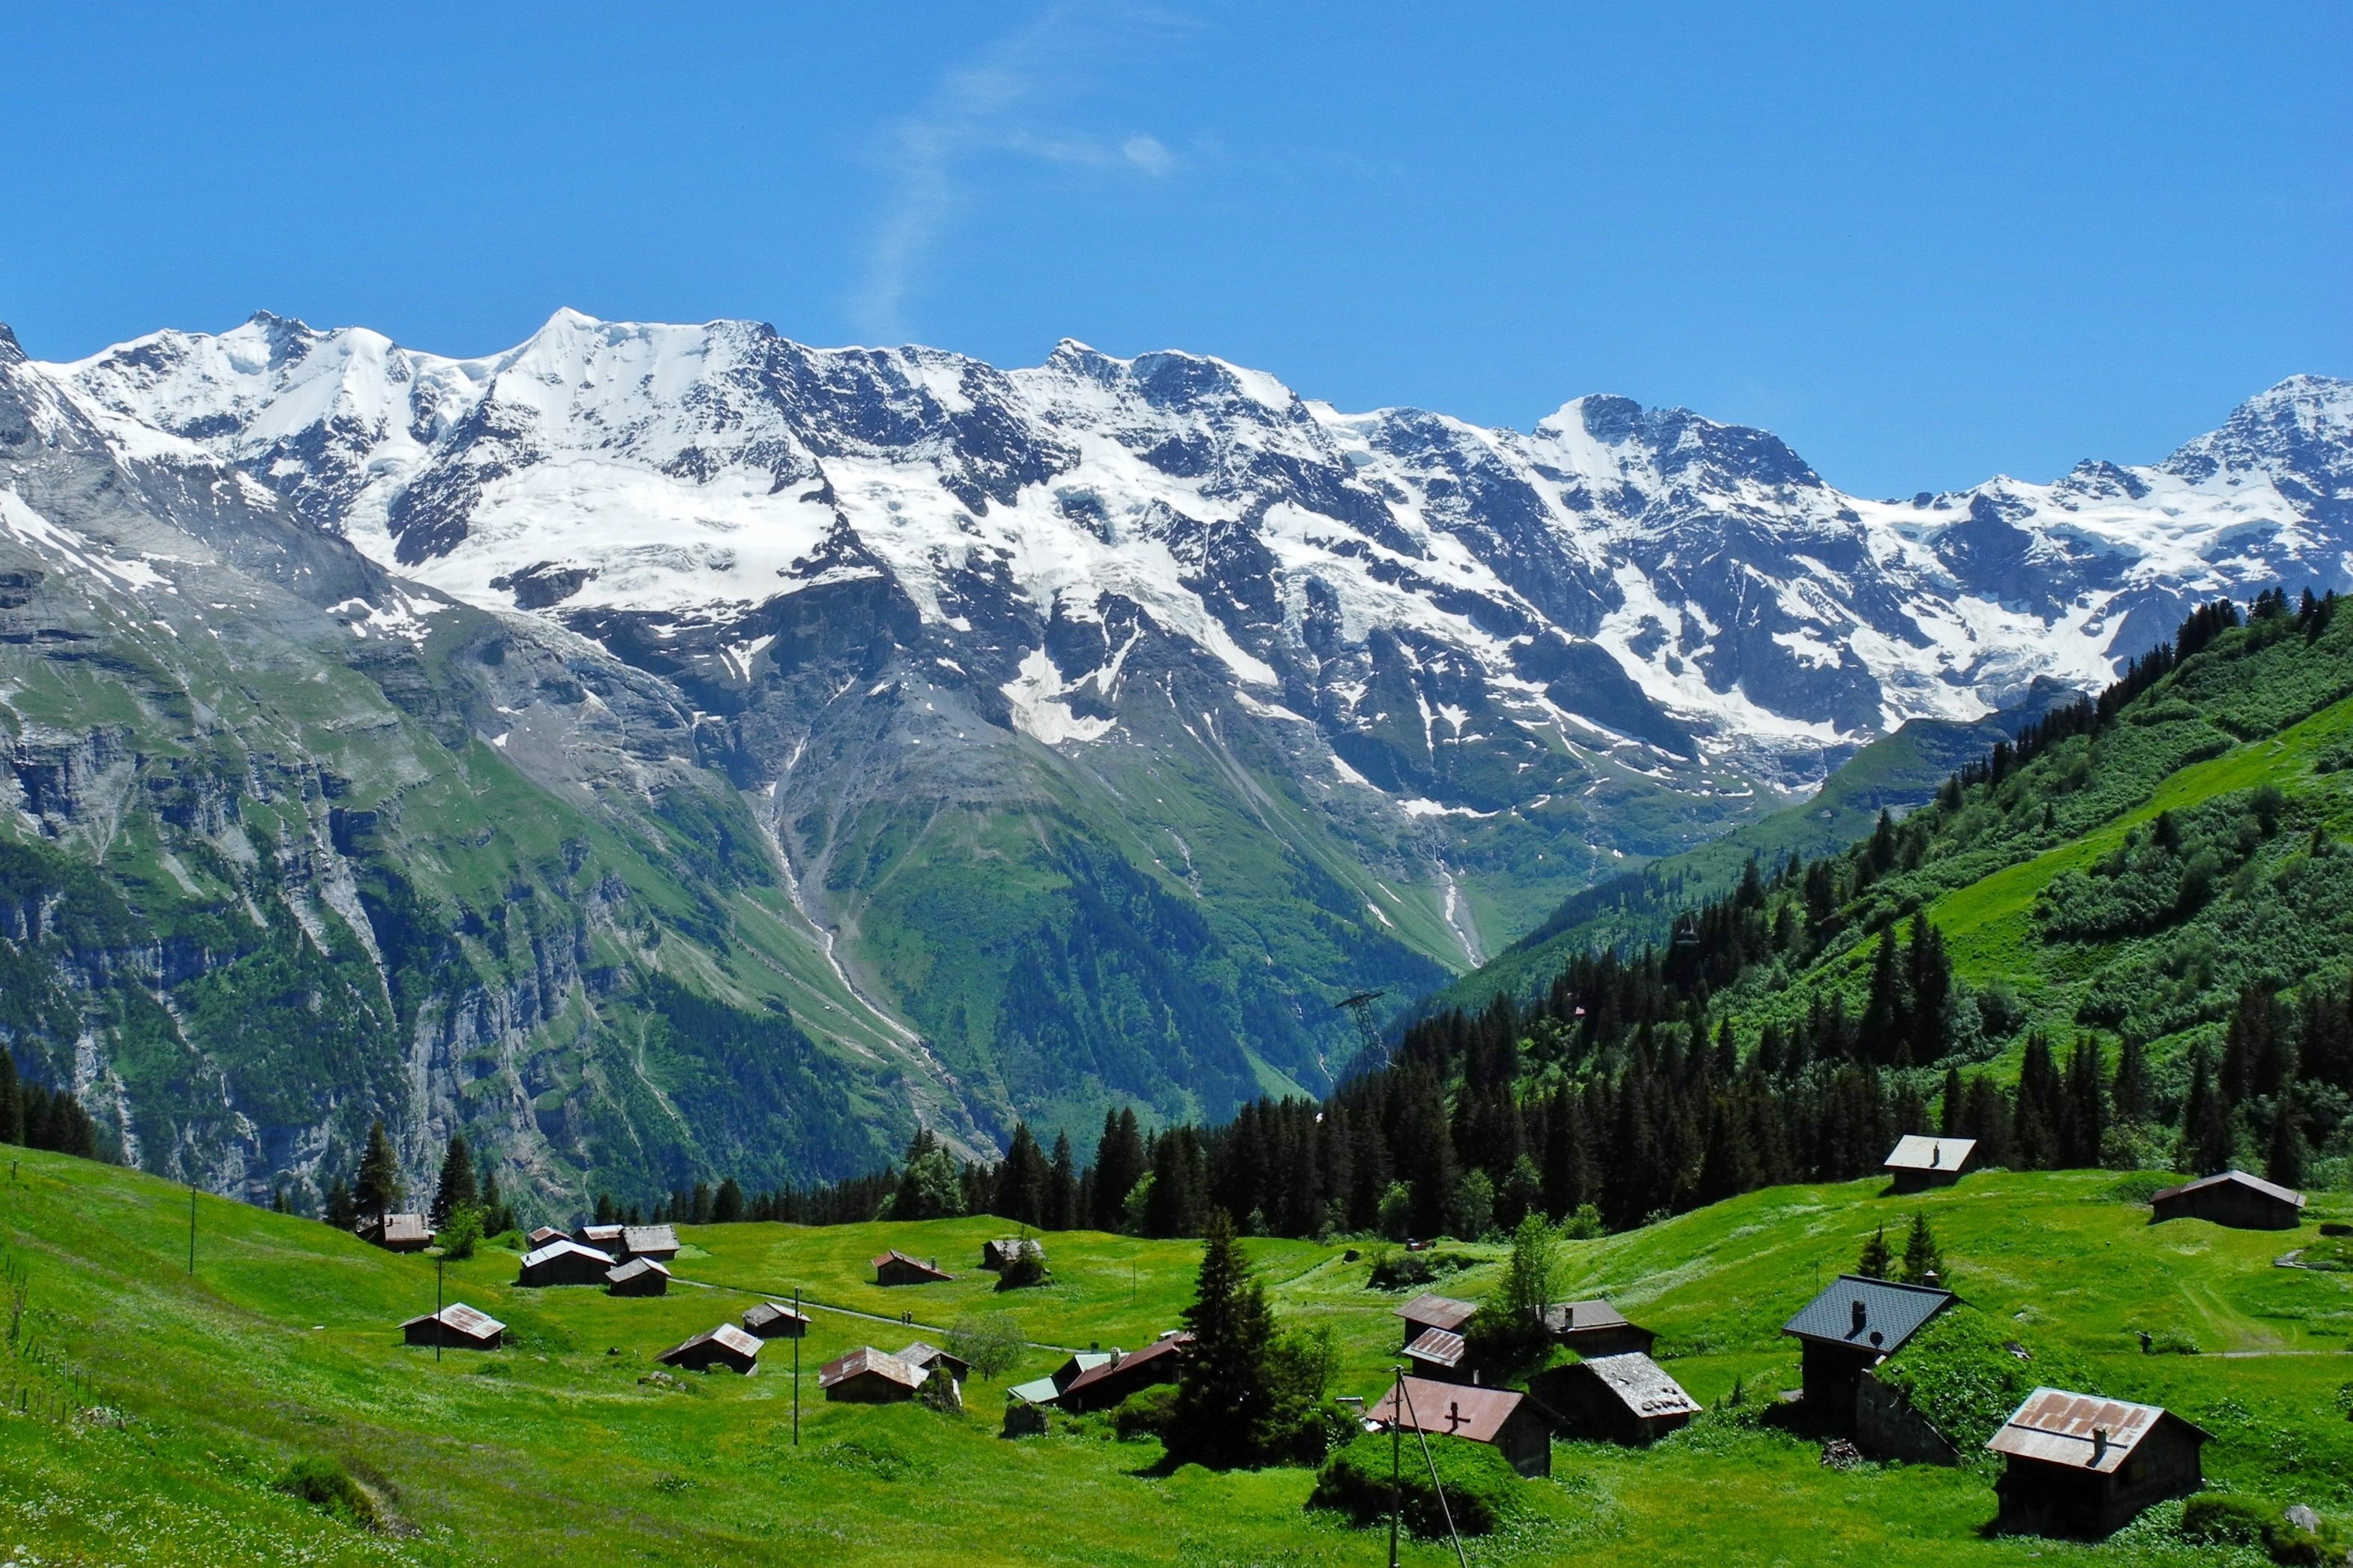 Walking and Sightseeing the Alps in Switzerland